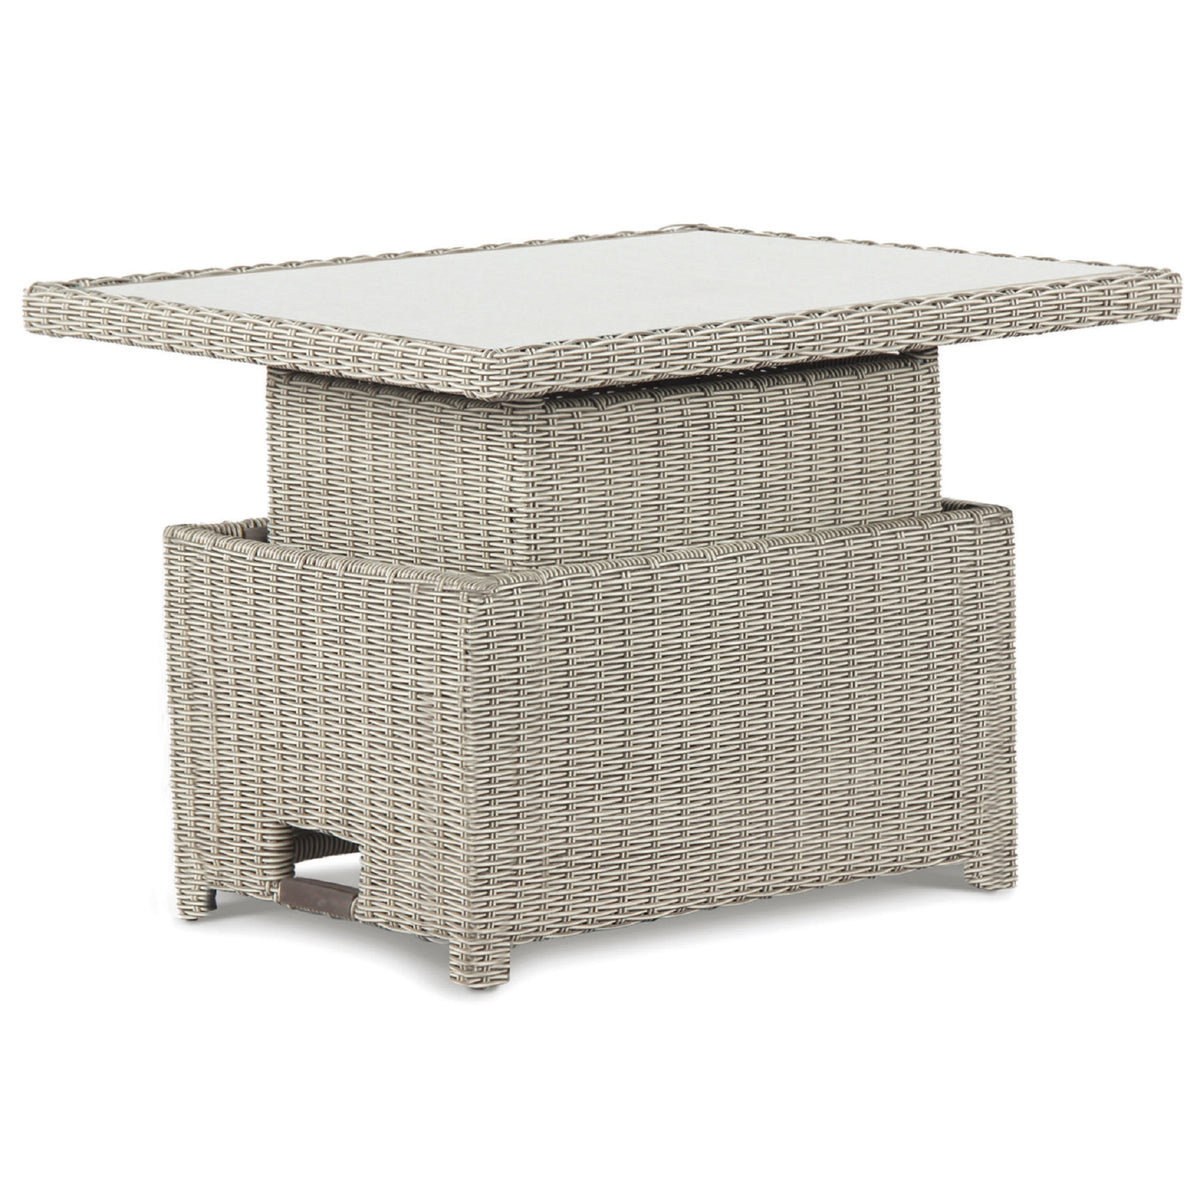 Kettler Palma Signature Mini White Wash Wicker High Low Adjustable Glass Top Table